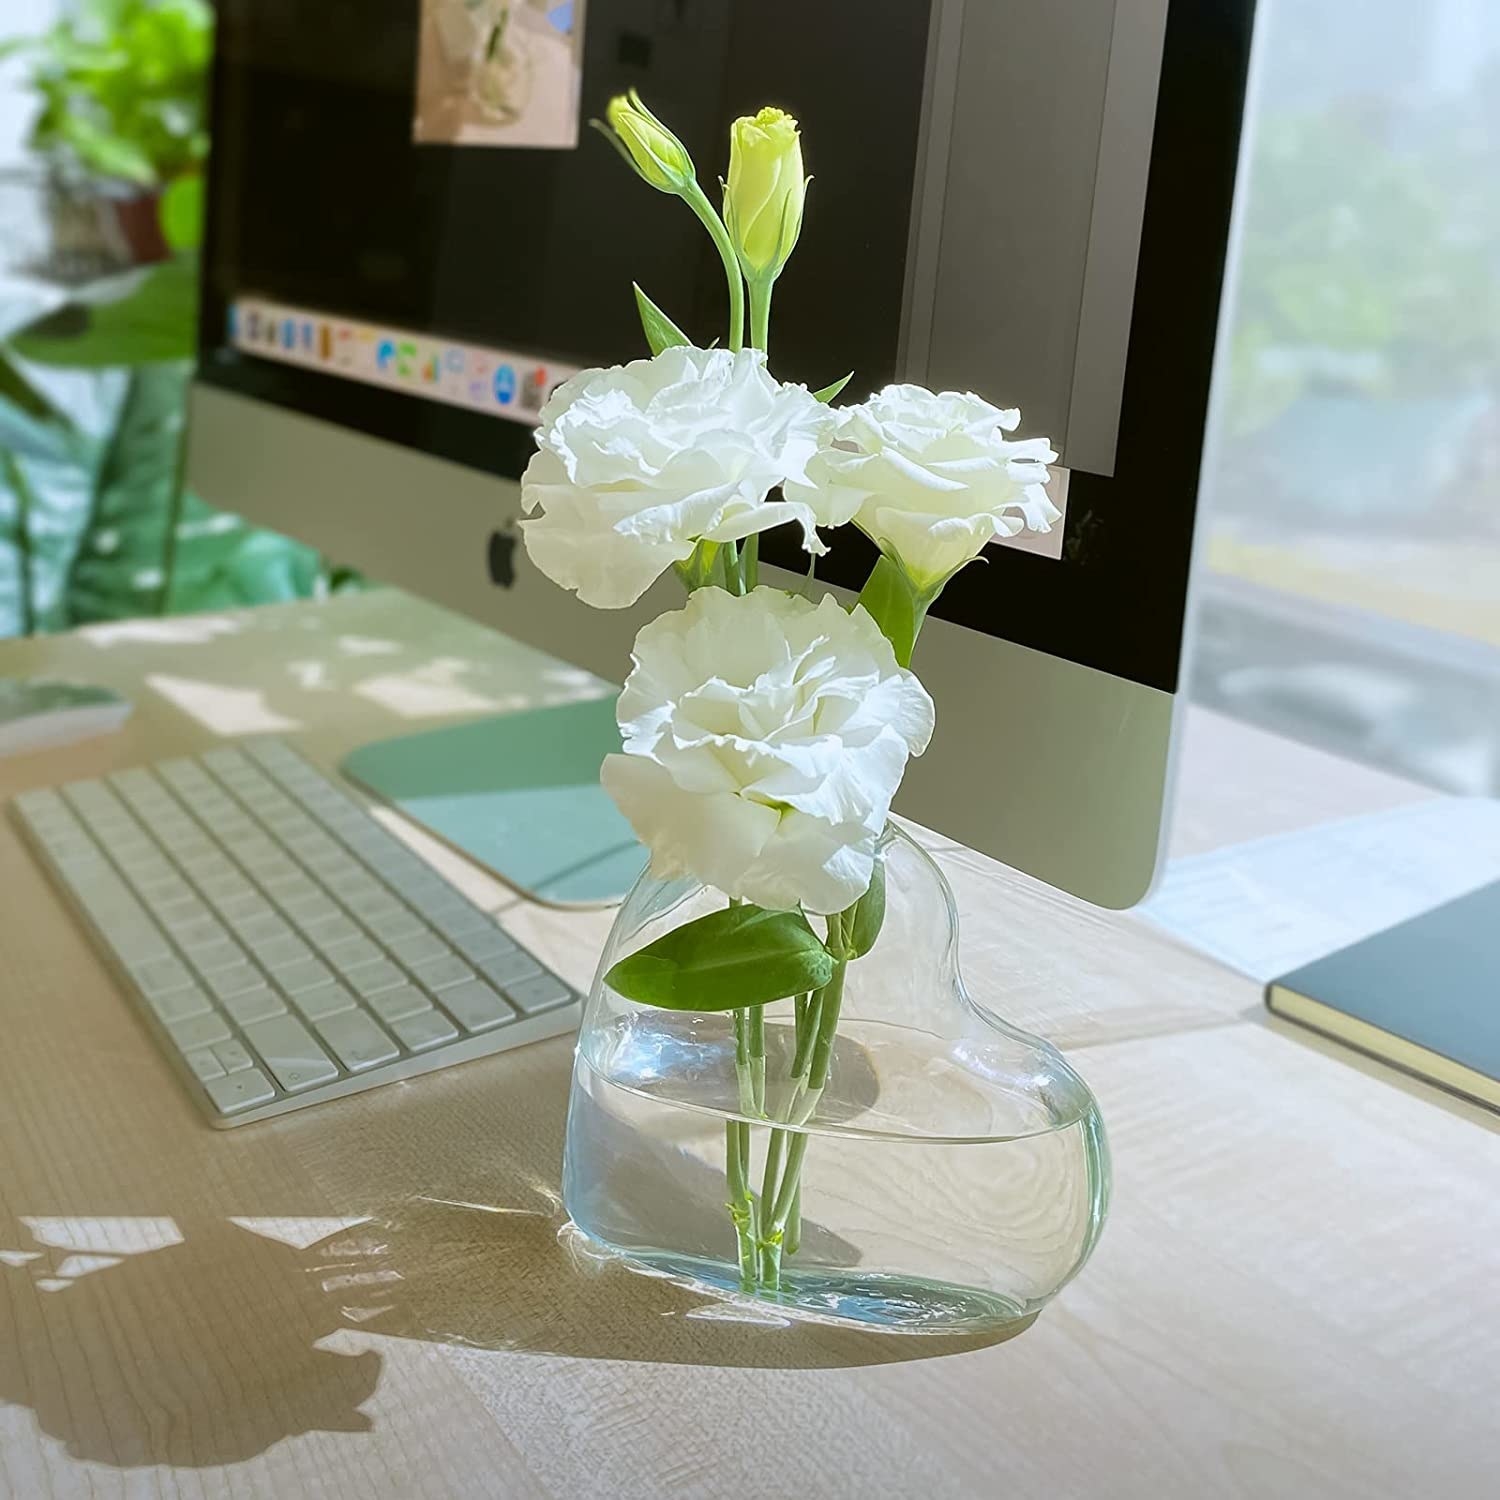 A bouquet in a vase on a desk